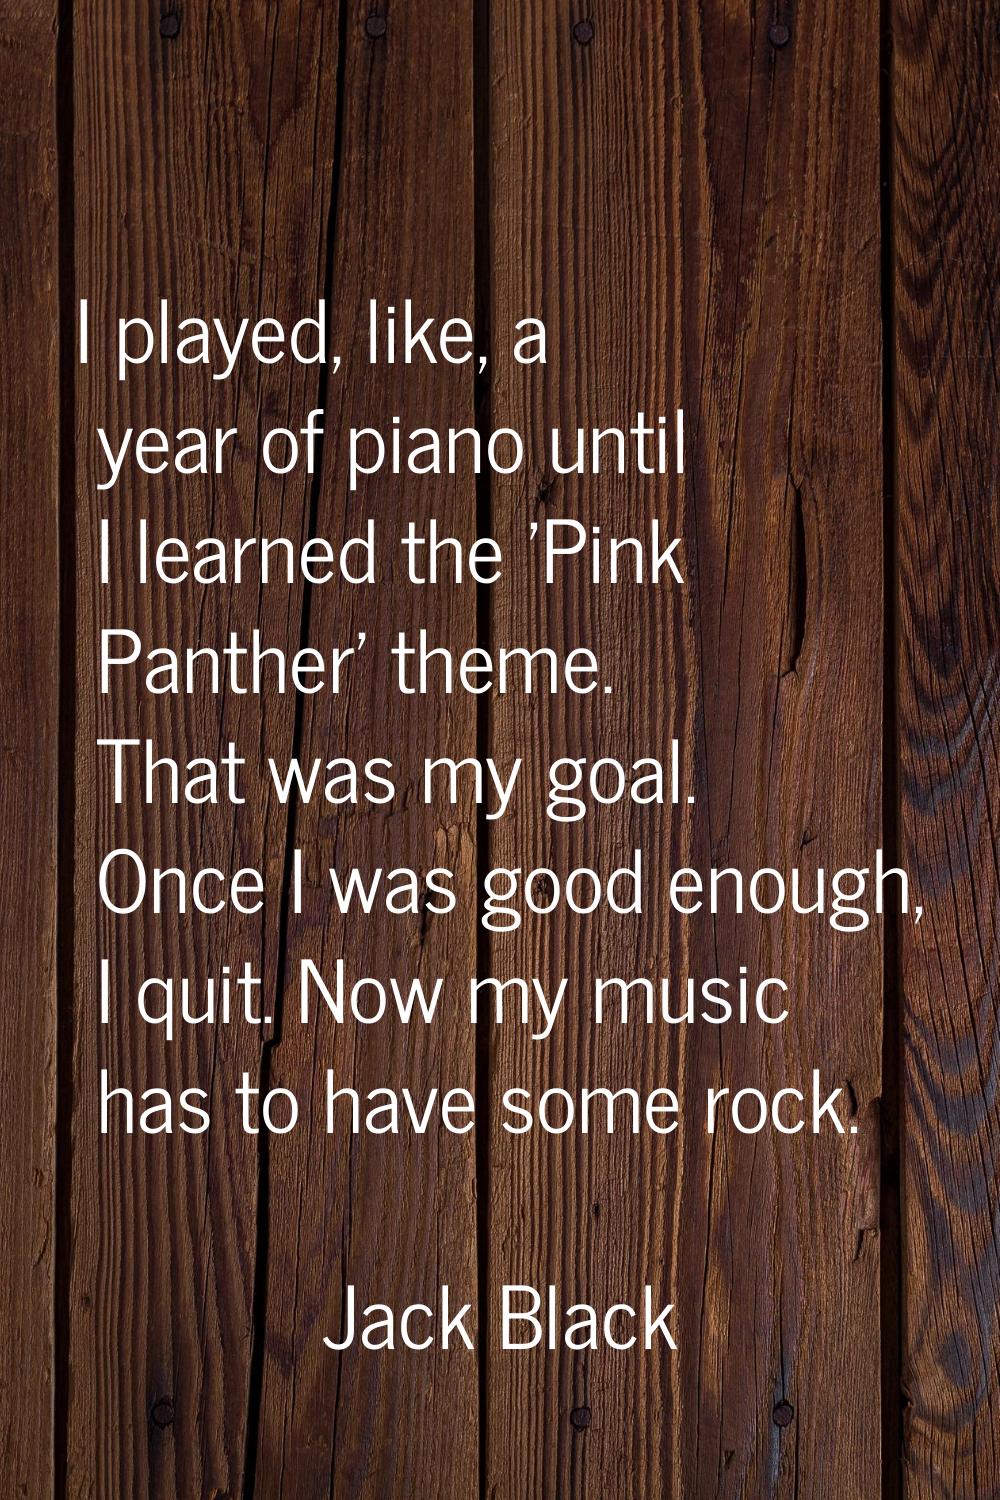 I played, like, a year of piano until I learned the 'Pink Panther' theme. That was my goal. Once I 